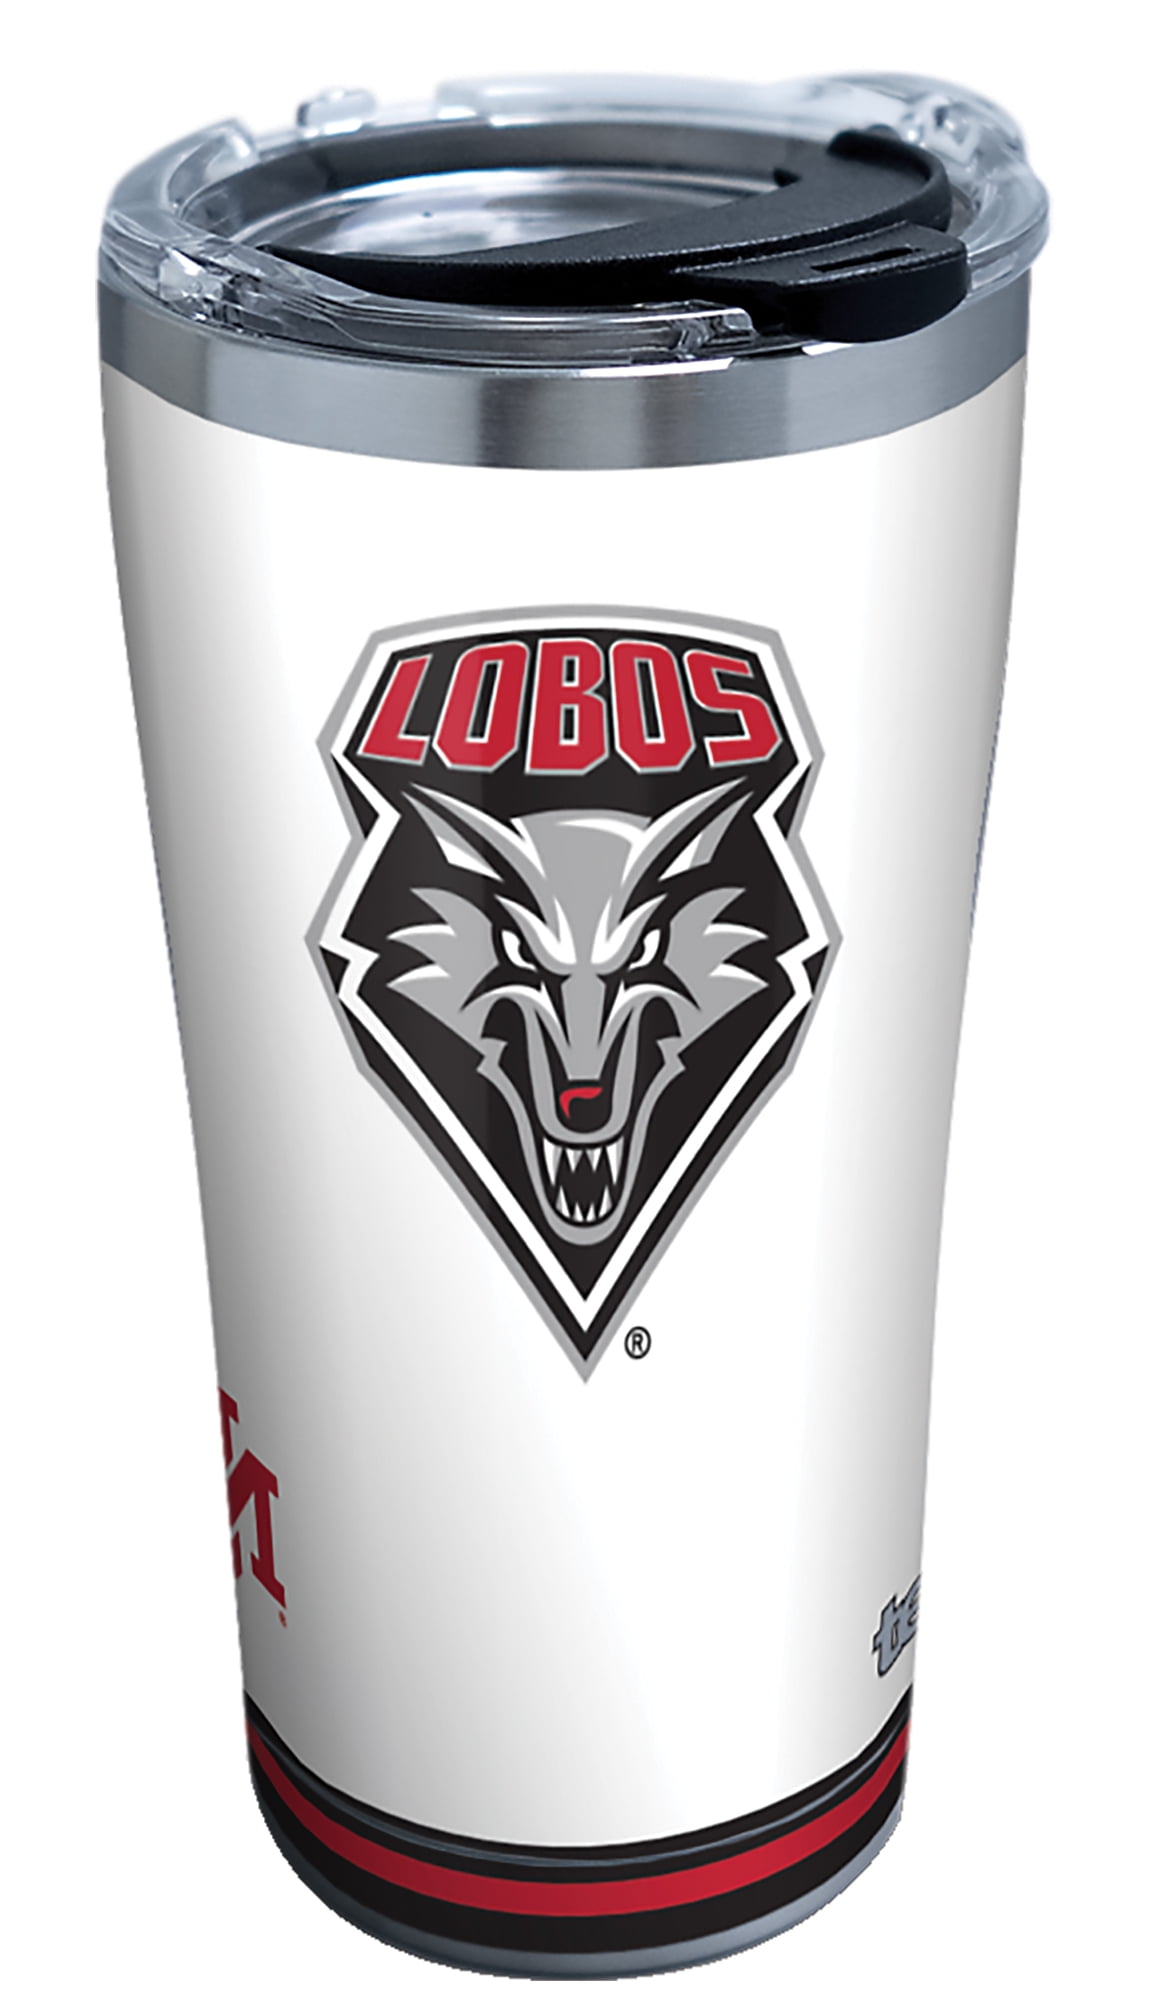 Arctic Tervis Made in USA Double Walled Ohio State Buckeyes Insulated Tumbler Cup Keeps Drinks Cold & Hot 24oz 